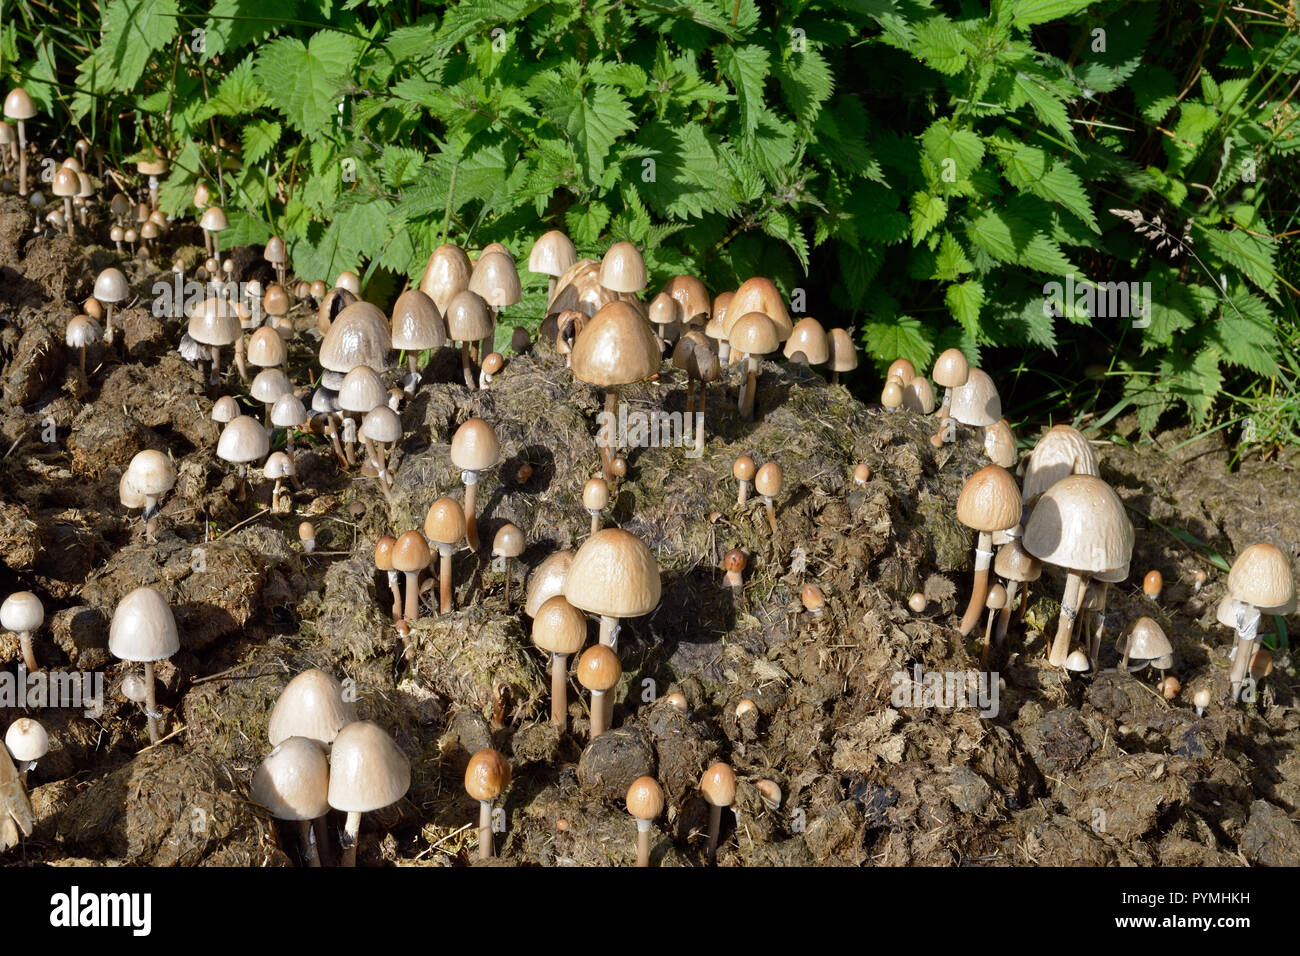 Panaeolus semiovatus is a saprobic fungus or toadstool often found in clusters on horse dung. Stock Photo